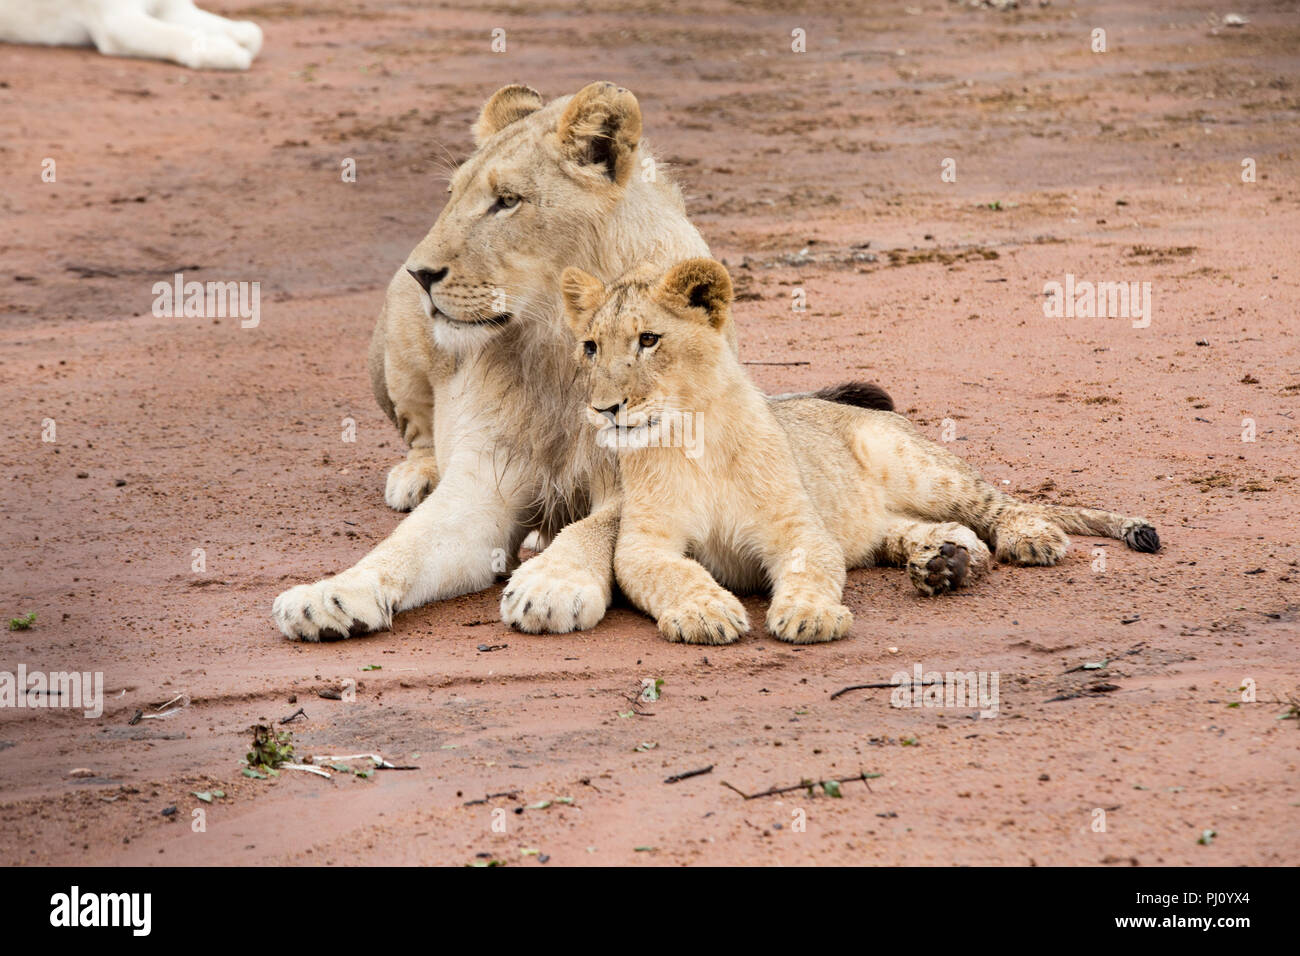 Lion and Lion Cub resting together Stock Photo